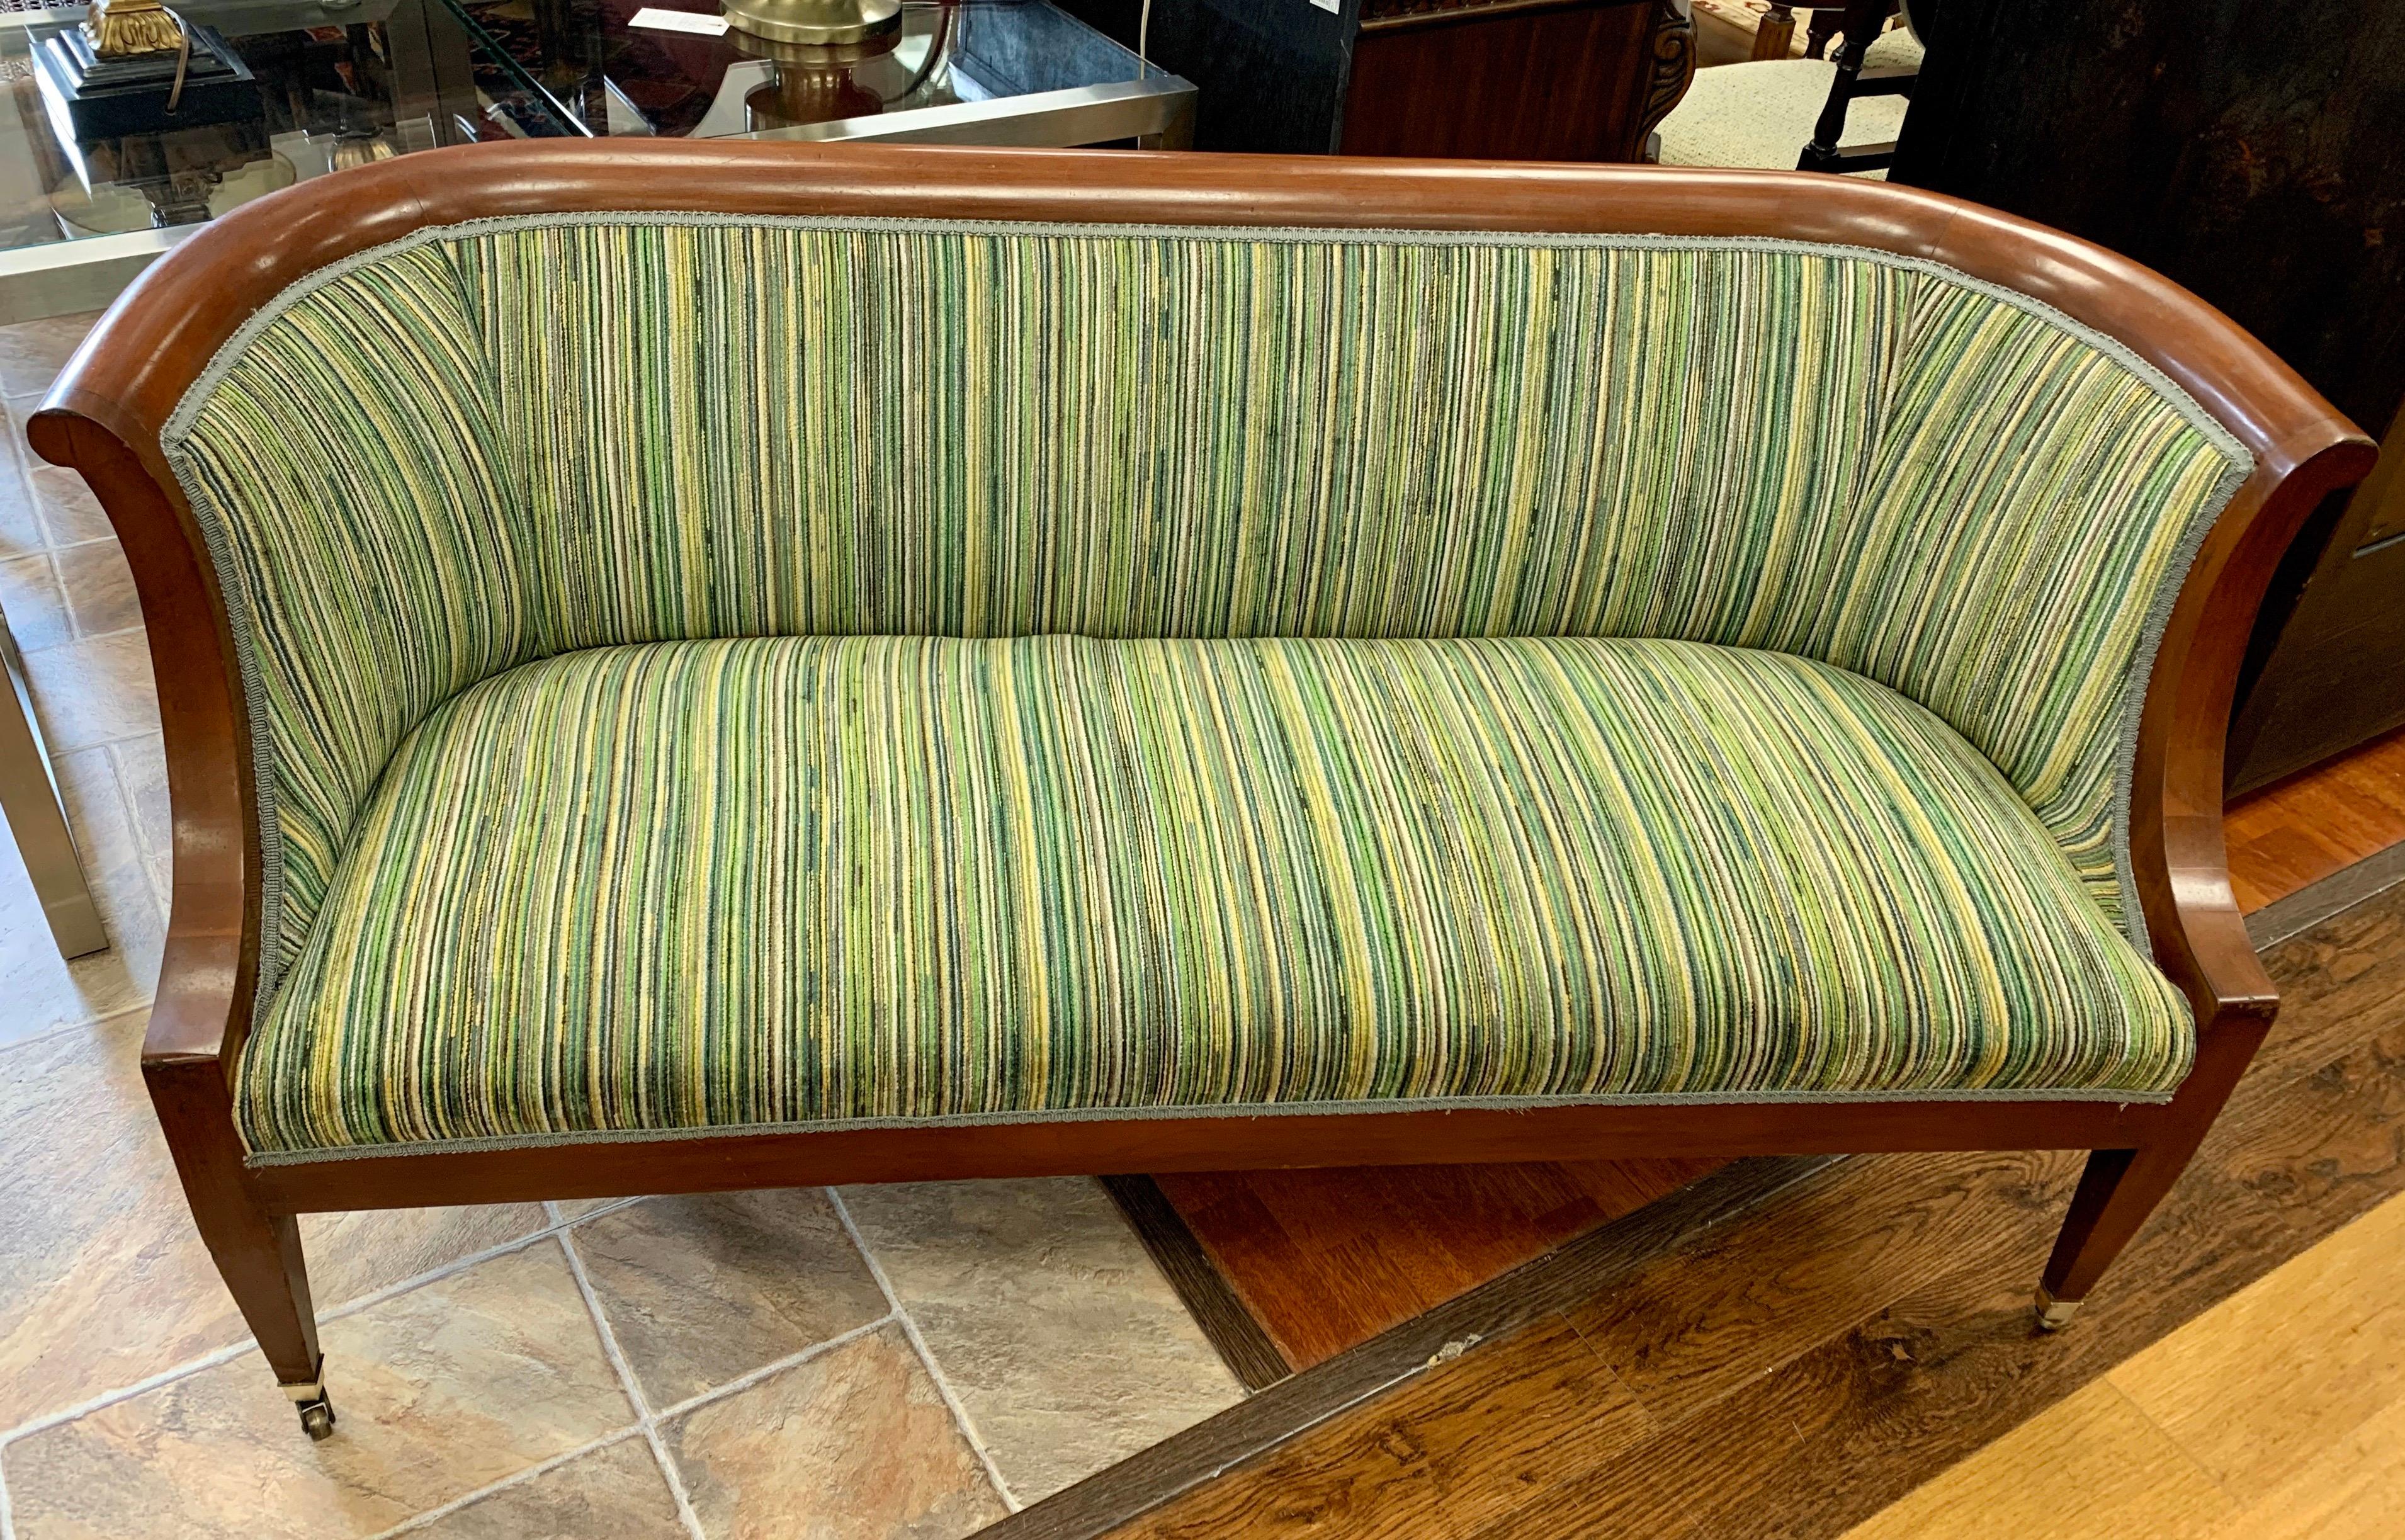 An antique mahogany settee with a straight back that curves gracefully at the arms. Upholstery is brand new and has a textural stripe in green, creams and blue. Front legs have brass castors. Wonderful lines throughout.